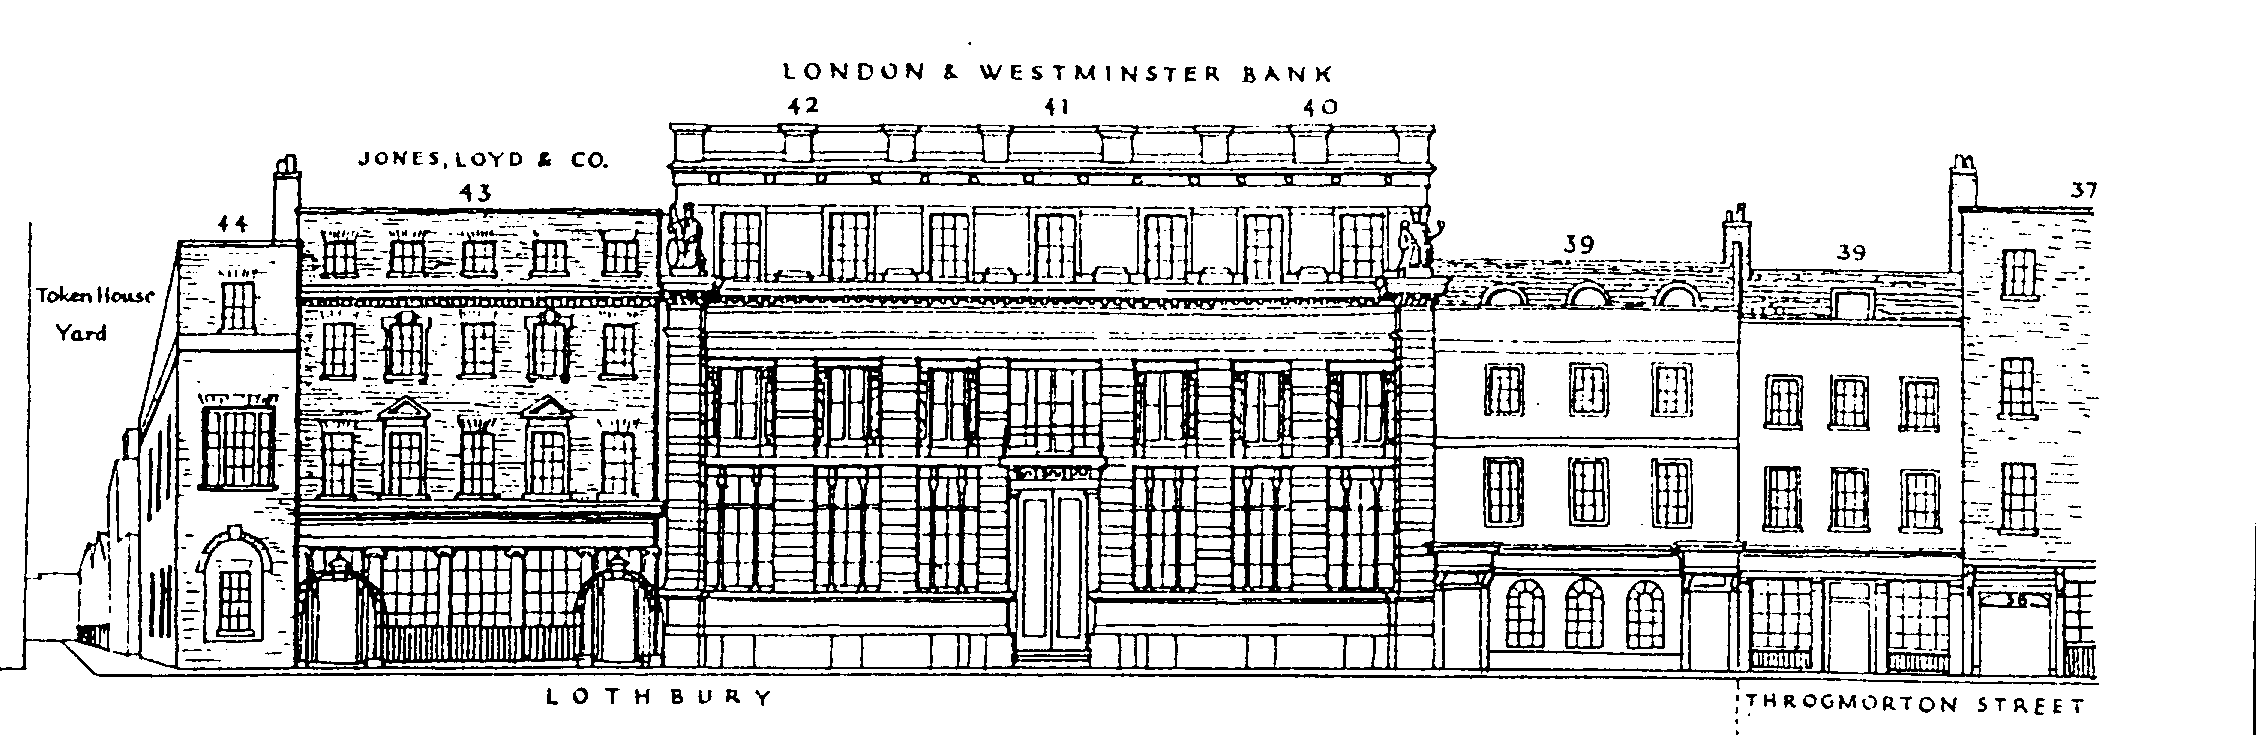 Fig. 12. drawing of London and Westminster Bank Headquarters, Lothbury (1834)